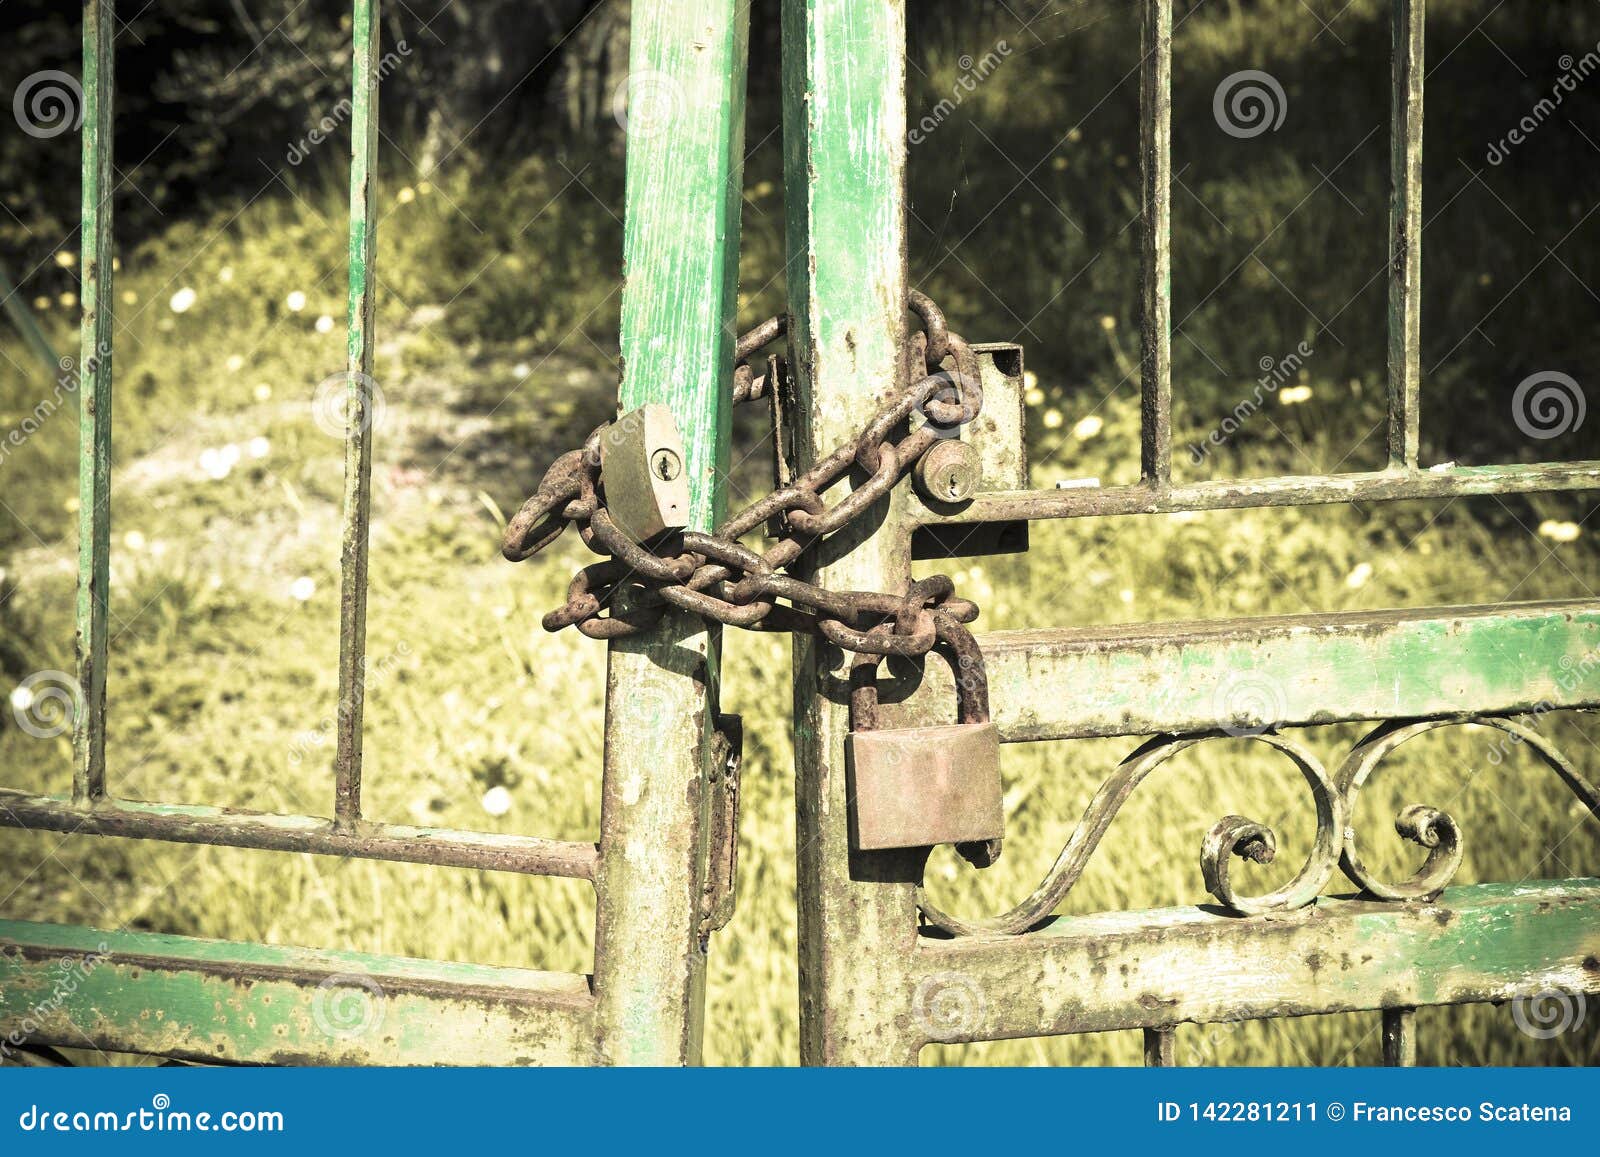 Metal Gate Closed with Padlock Stock Image - Image of safety, locked ...